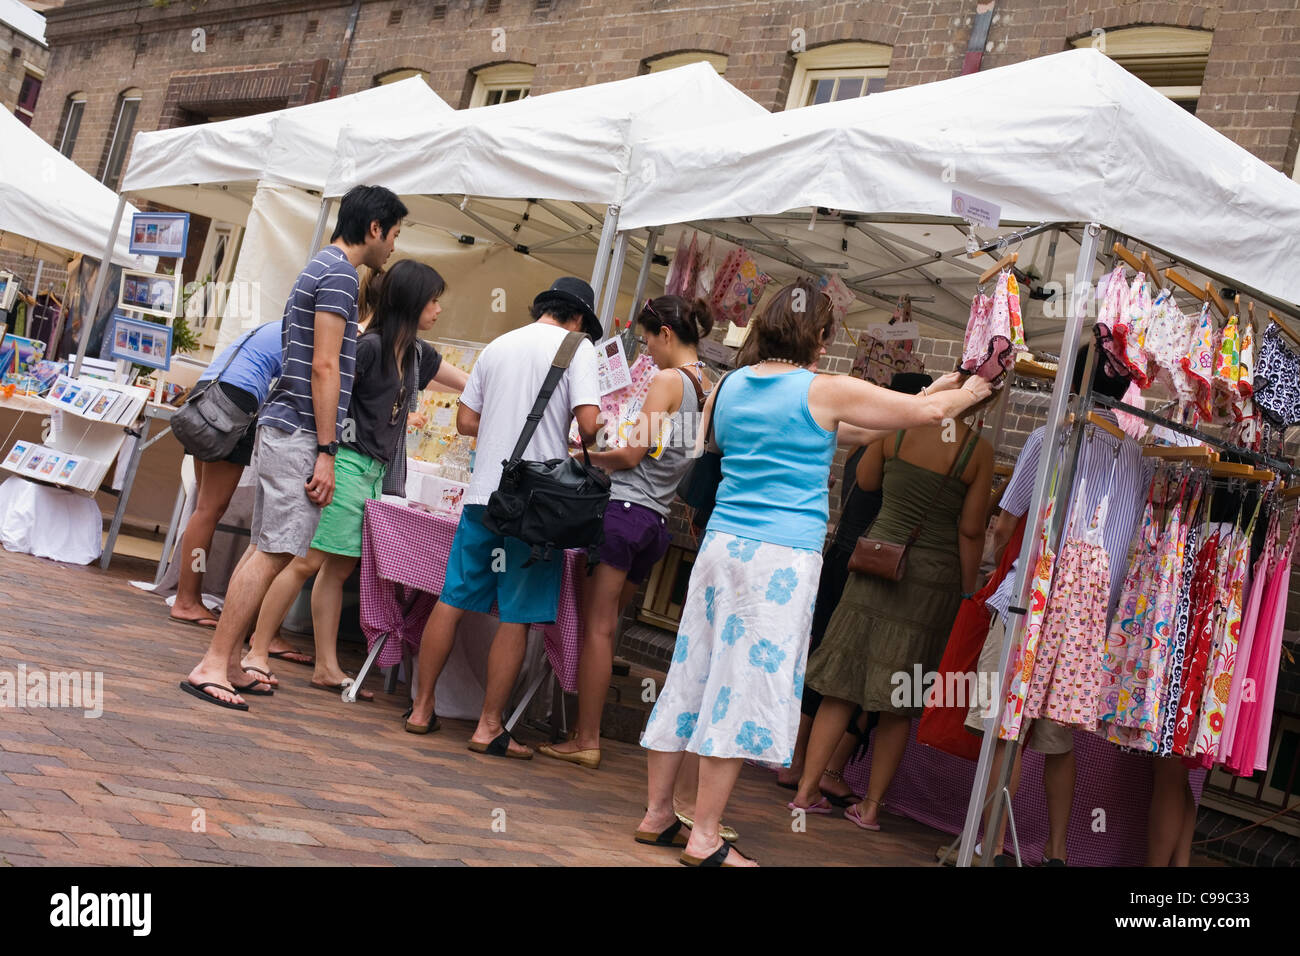 Tourists browse stalls at The Rocks Market.  Sydney, New South Wales, Australia Stock Photo